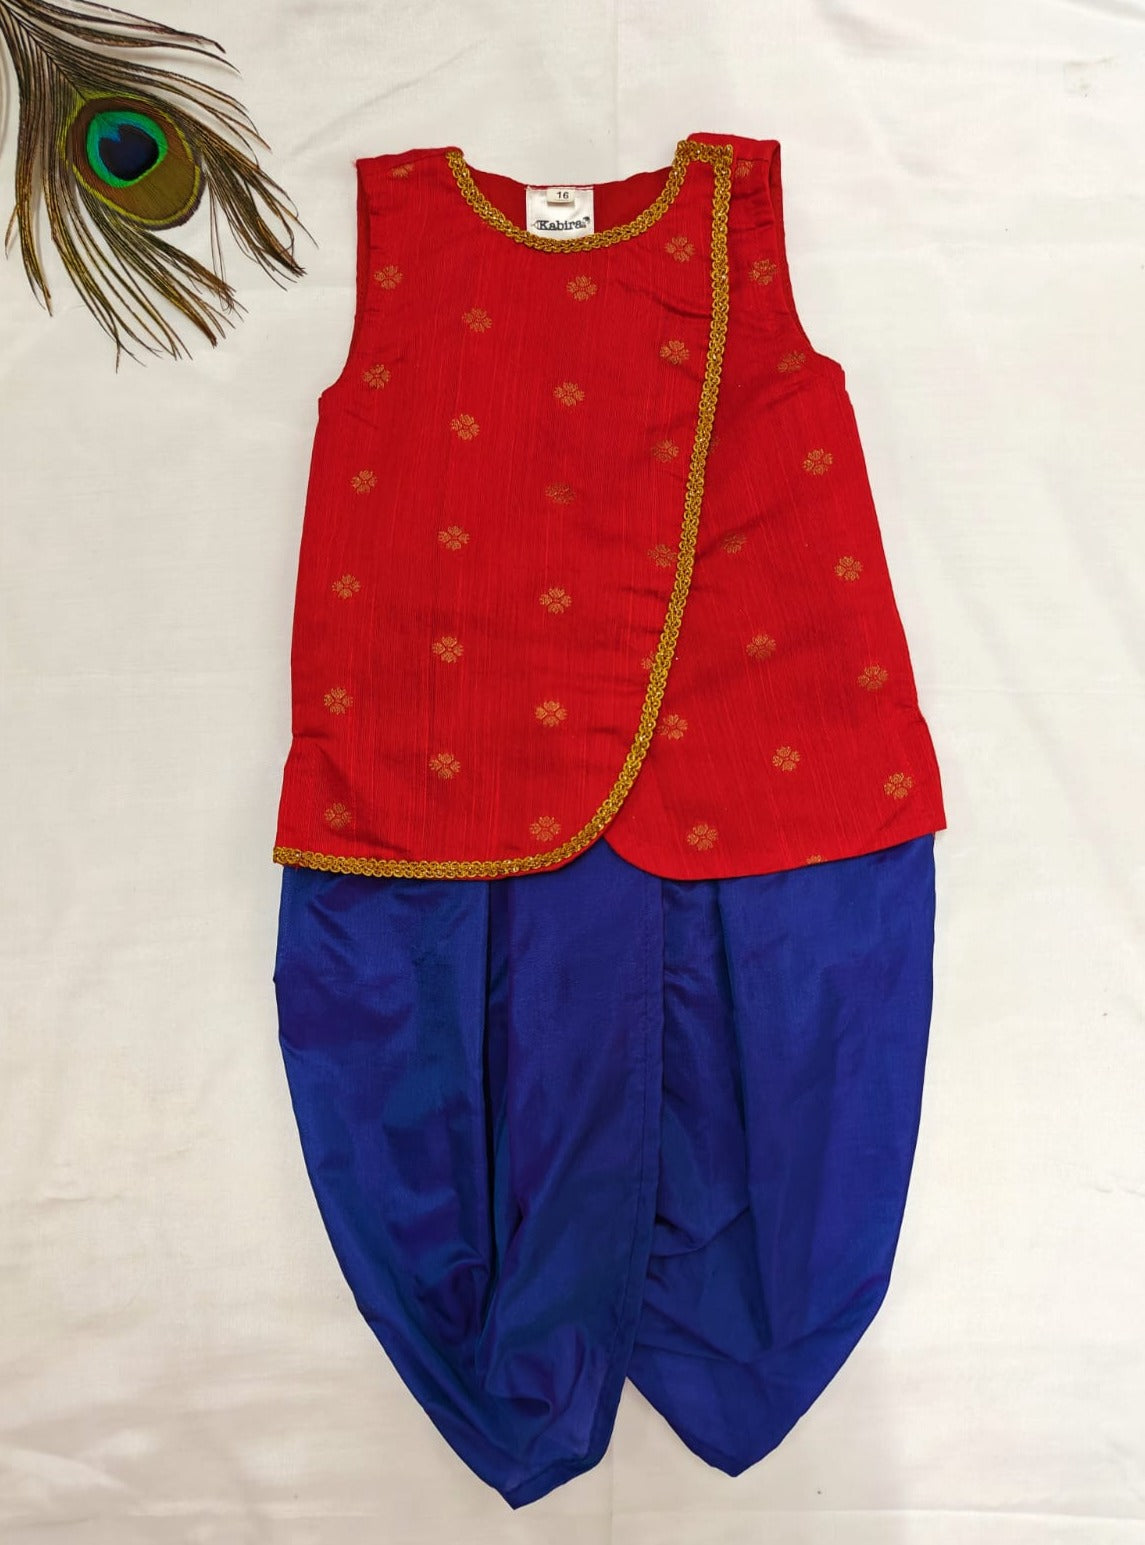 This Kanha set features a royal blue coloured silk Dhoti paired with a front open red sleeveless Kurta. The neck and front opening of the Kurta are adorned with golden lace, making it perfect for both Mundan ceremonies and Janmashtami celebrations.